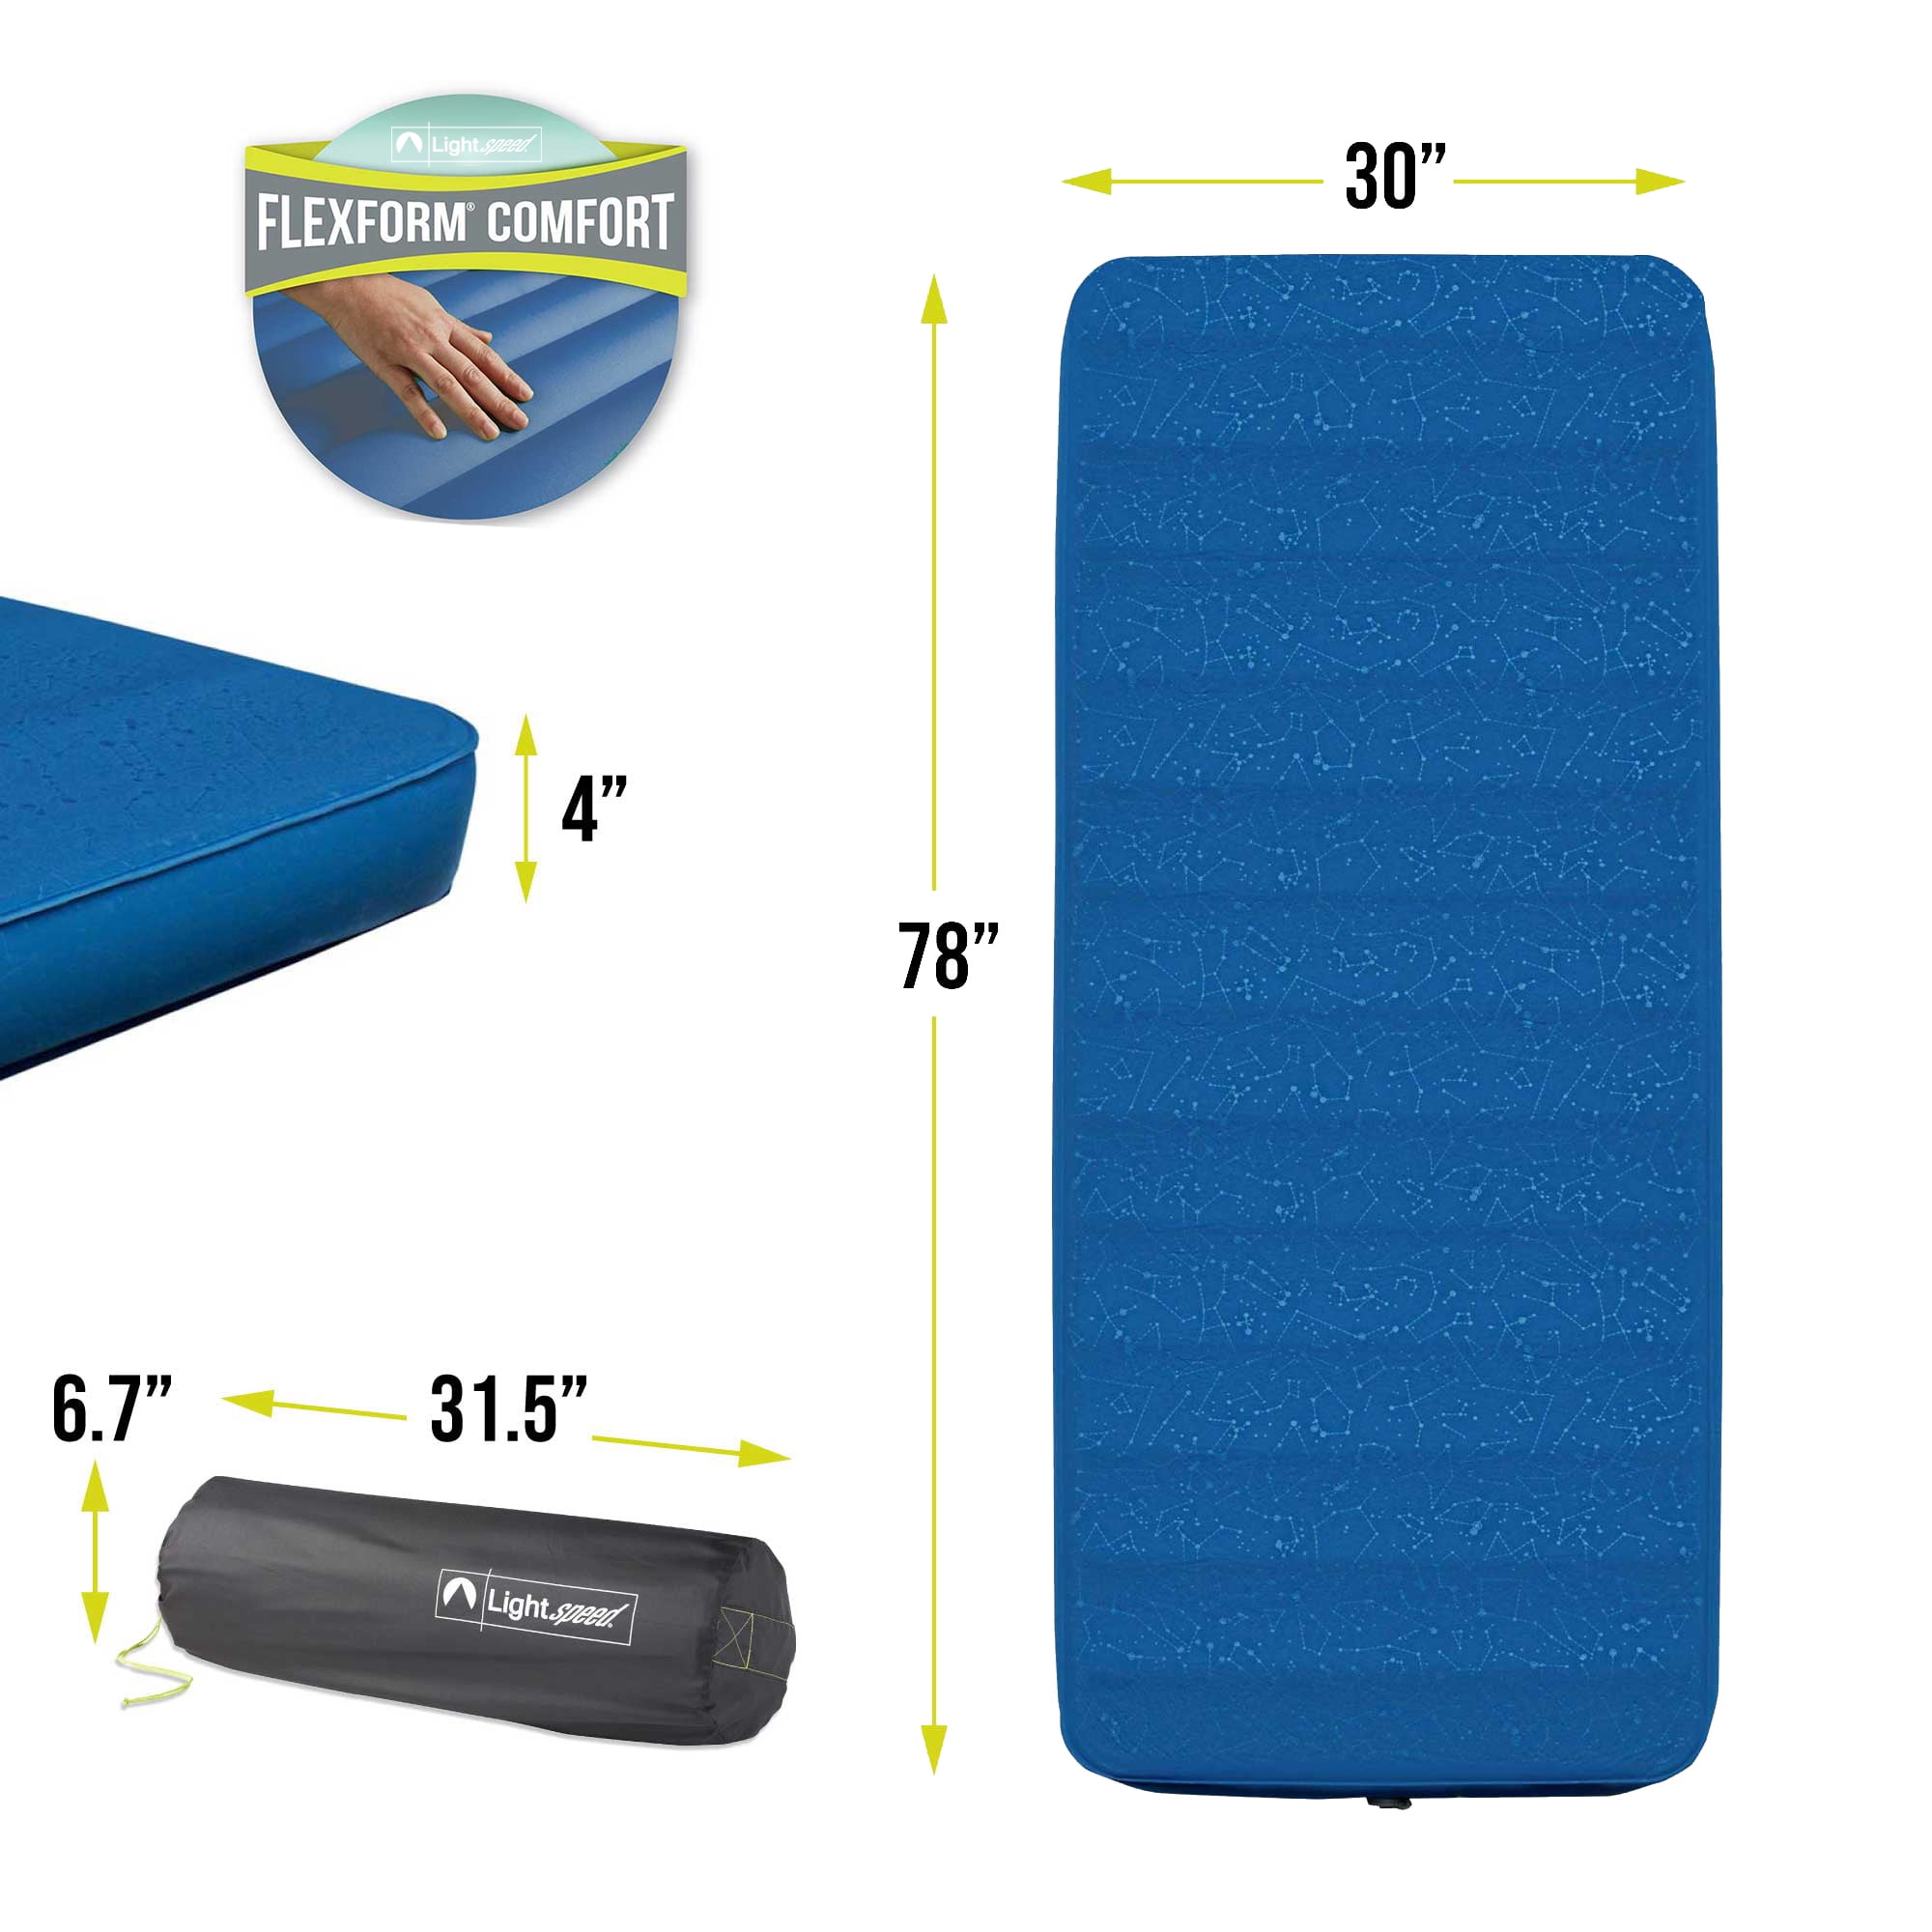 Lightspeed Outdoors ECO 3D Deluxe Flexform Sleep Pad Ultra-Soft Camping  Mattress Pad for Deluxe Sleep Experience Camping Self-Inflating Sleeping 